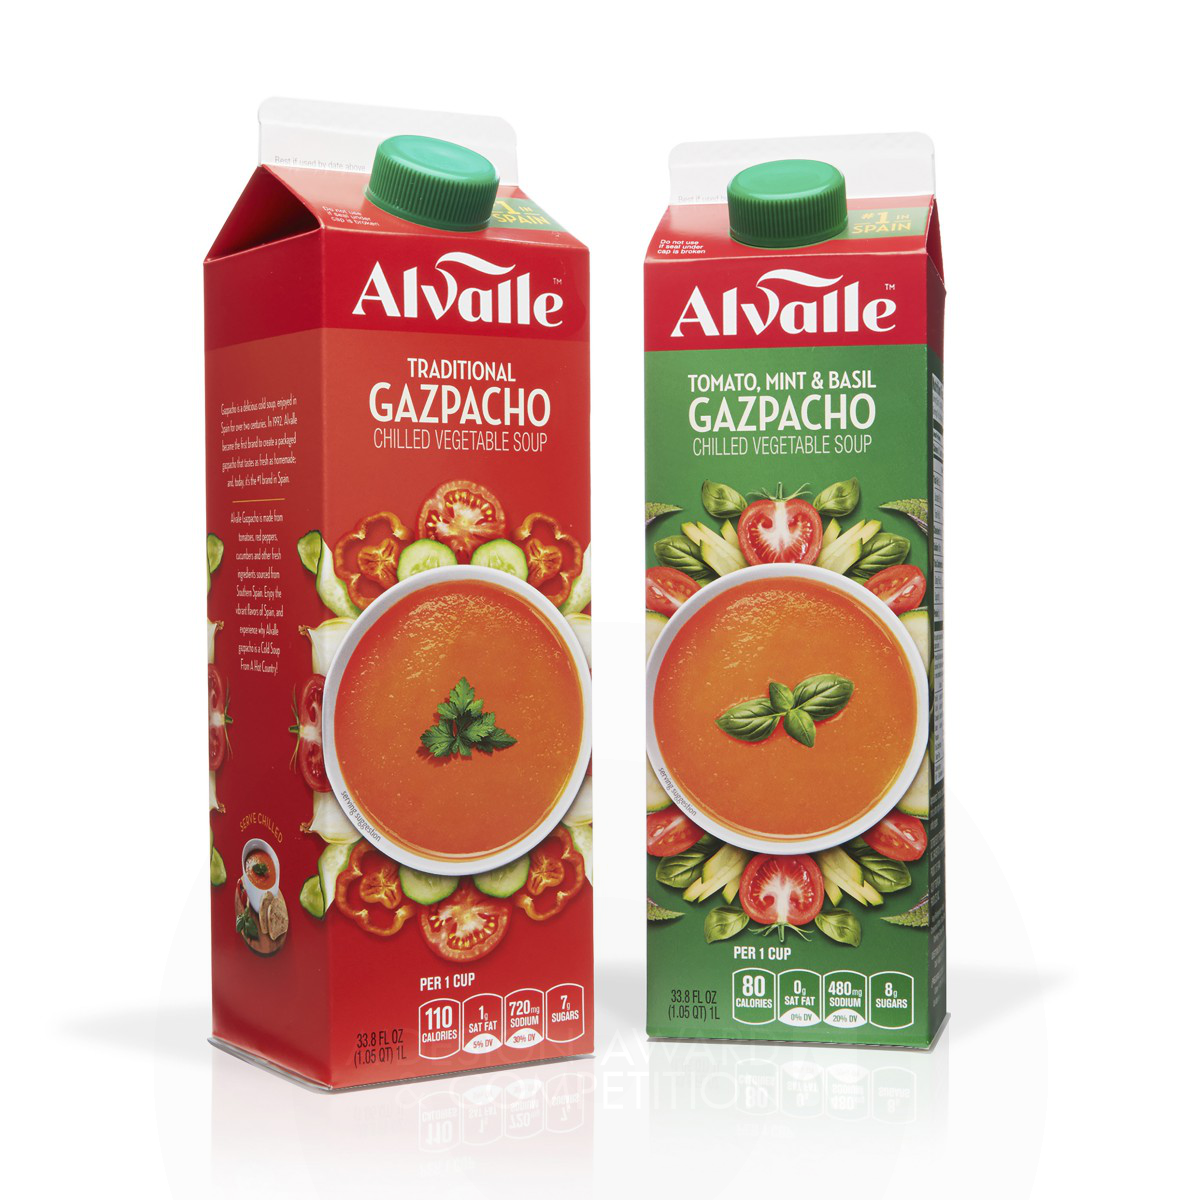 Alvalle Redesign Food Packaging by PepsiCo Design and Innovation